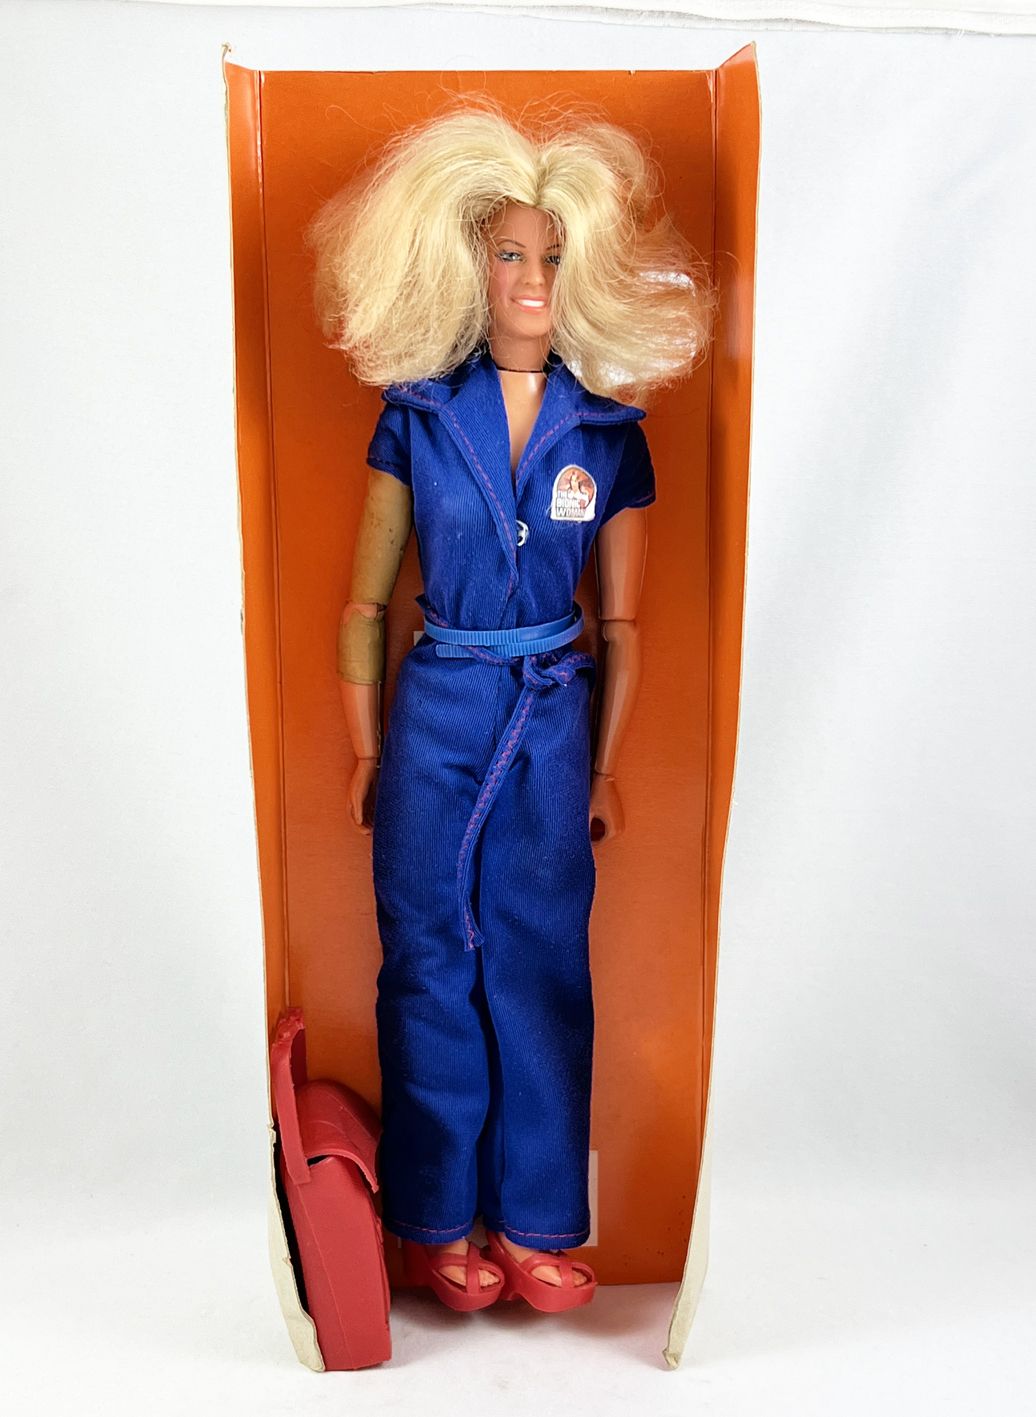 Jaime Sommers The Bionic Woman Action Figure With Mission Purse